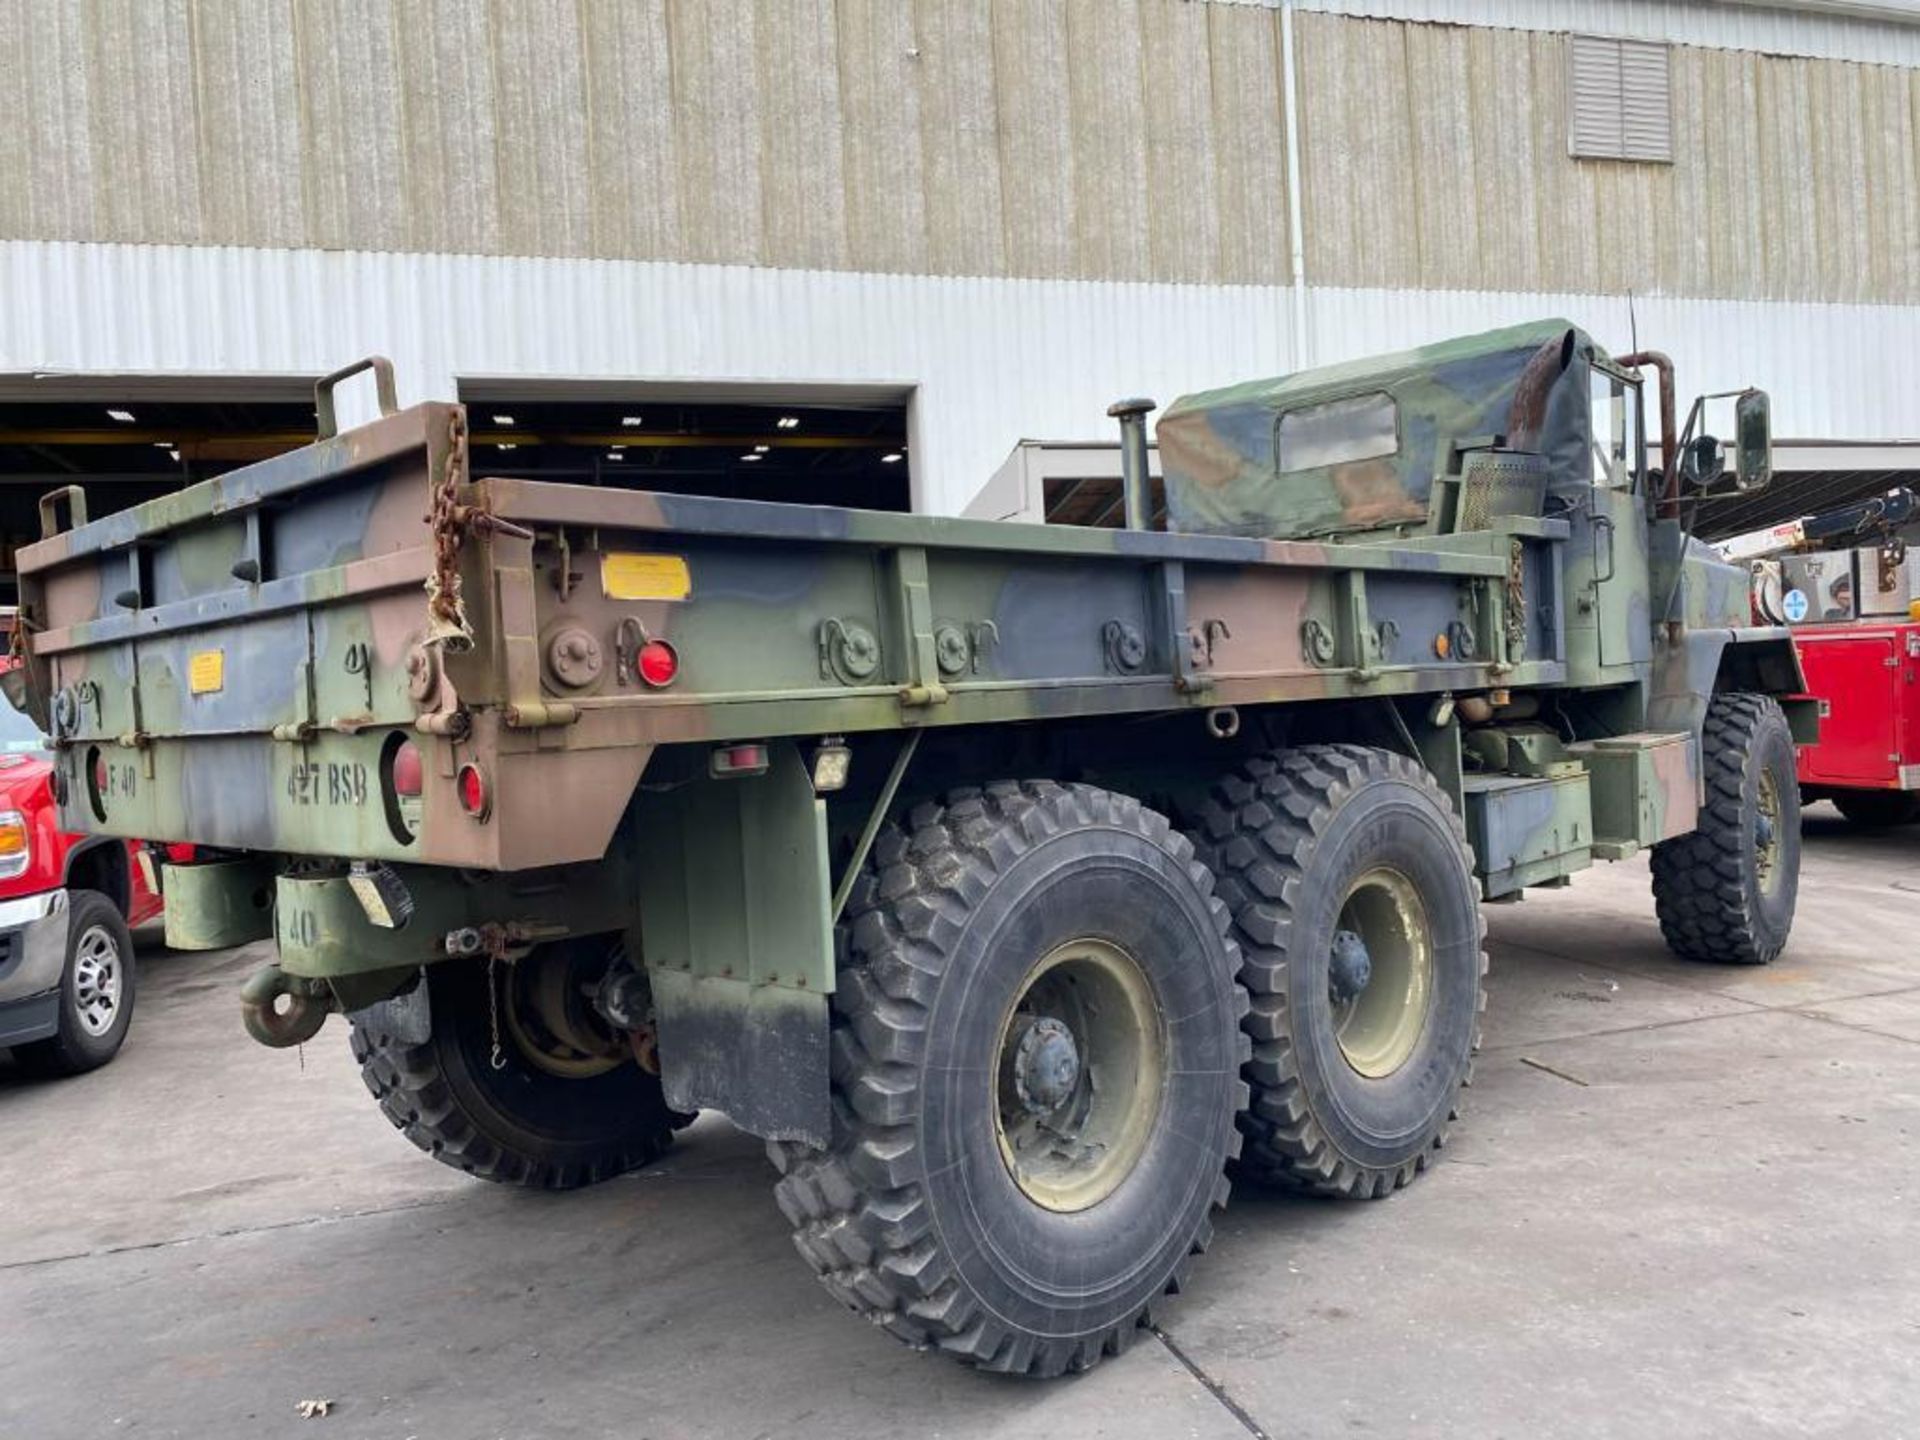 1985 AM GENERAL 2-1/2-Ton 6X6 Military Vehicle - Image 53 of 56